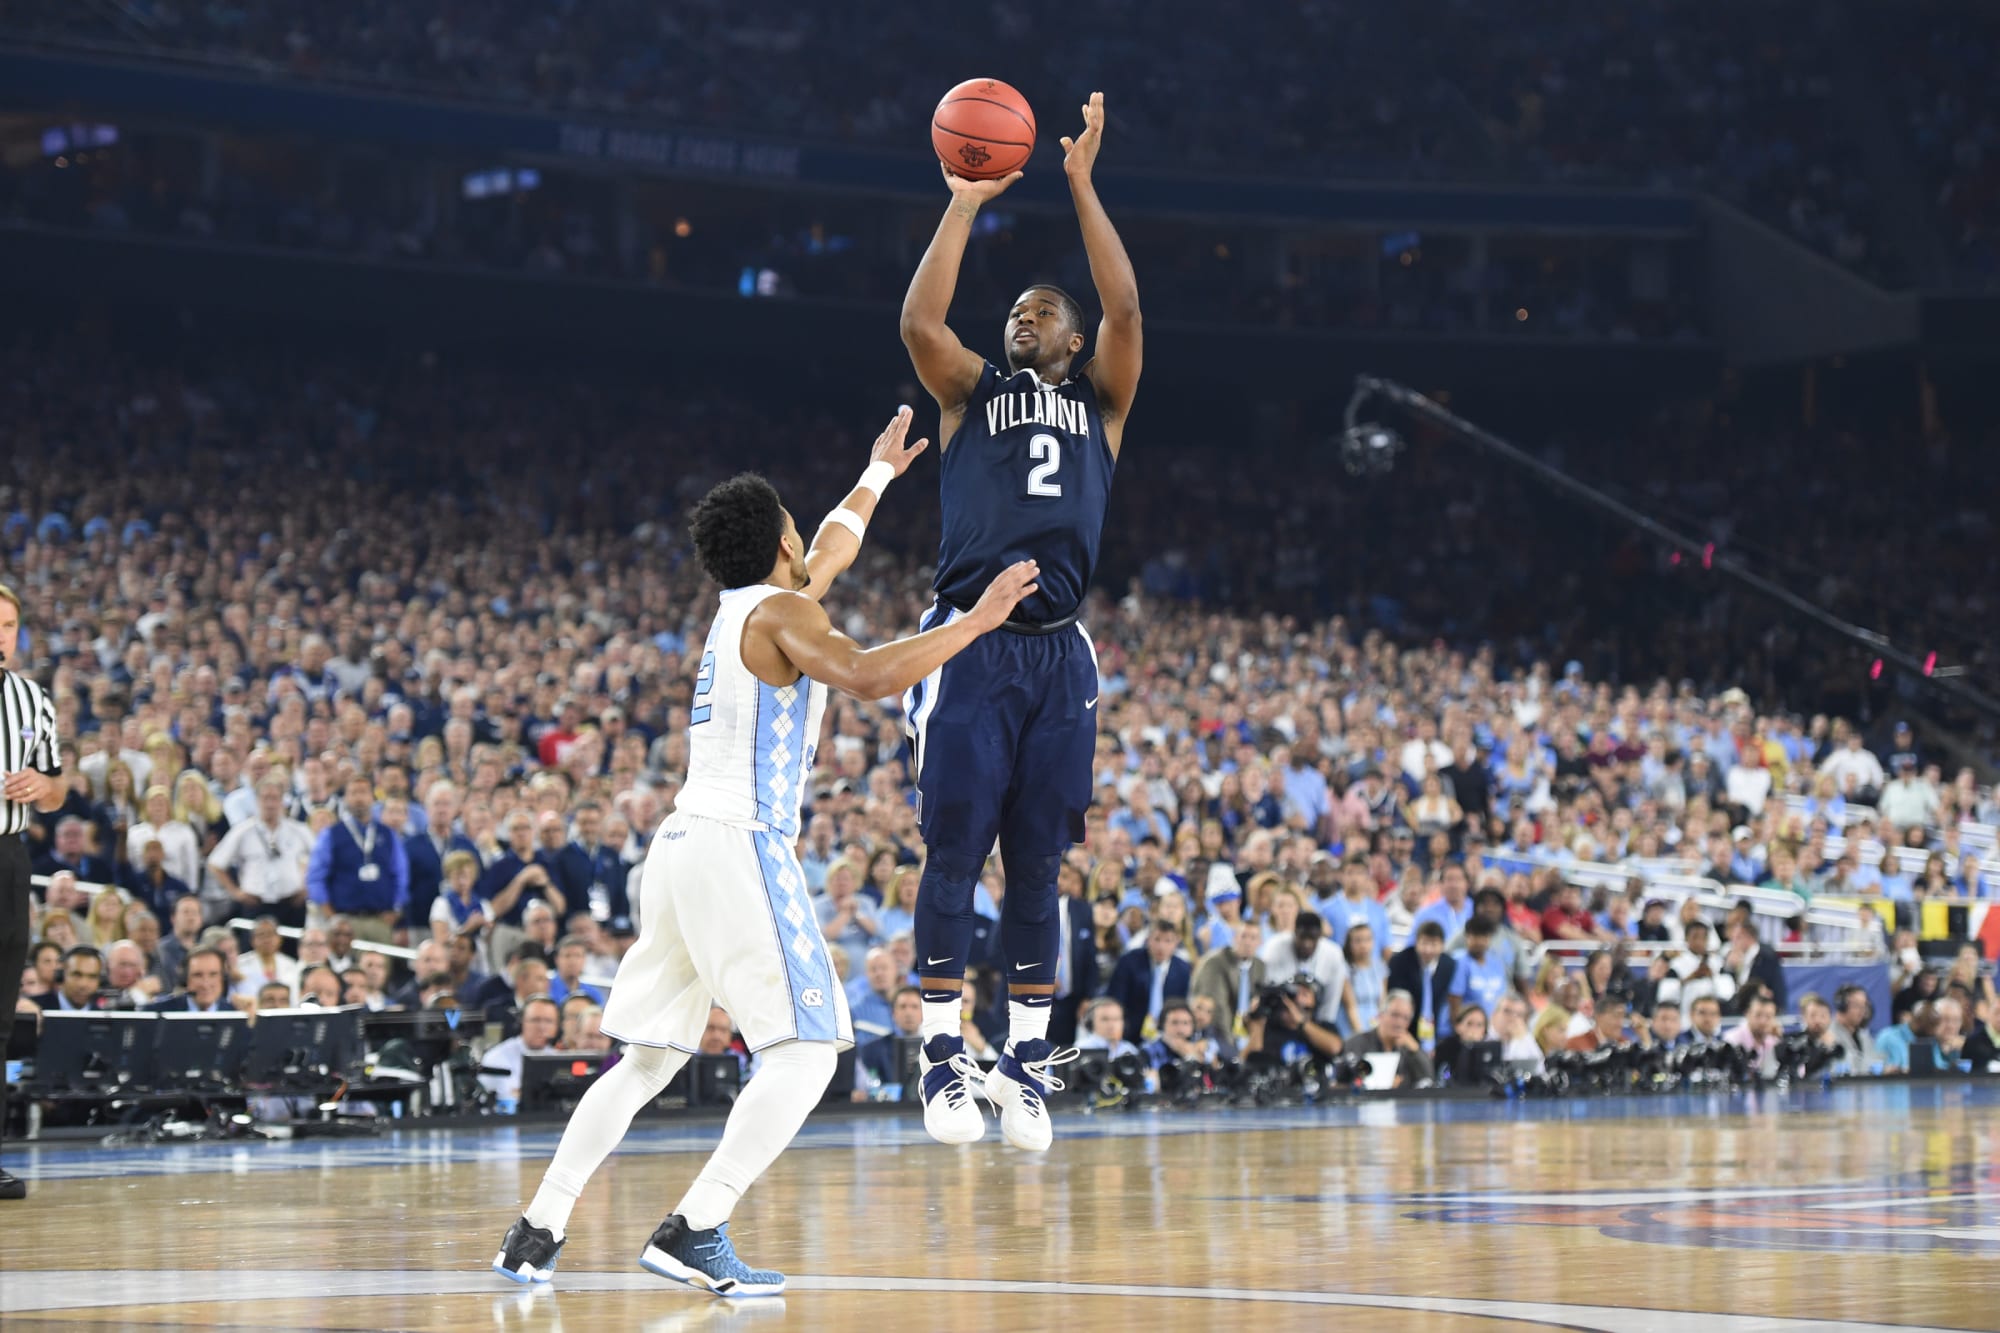 March Madness: 25 greatest buzzer-beaters in NCAA Tournament history